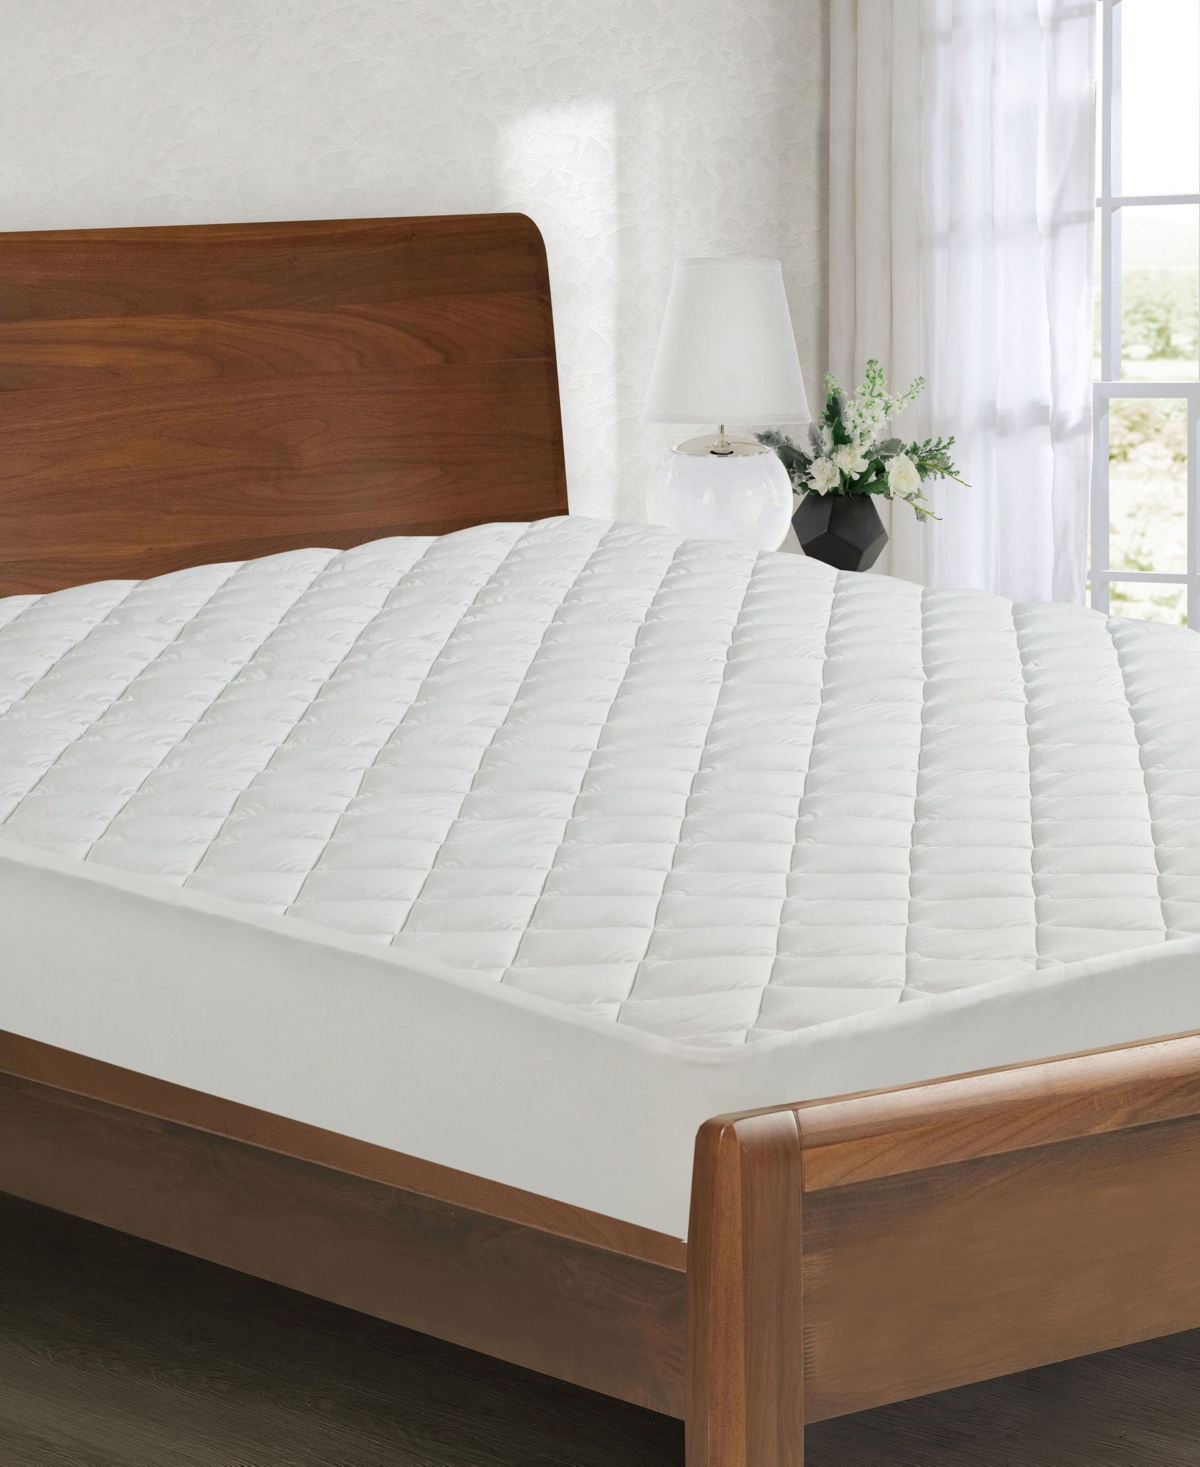 All-In-One Performance Stretch Moisture Wicking Fitted Mattress Pad, Twin